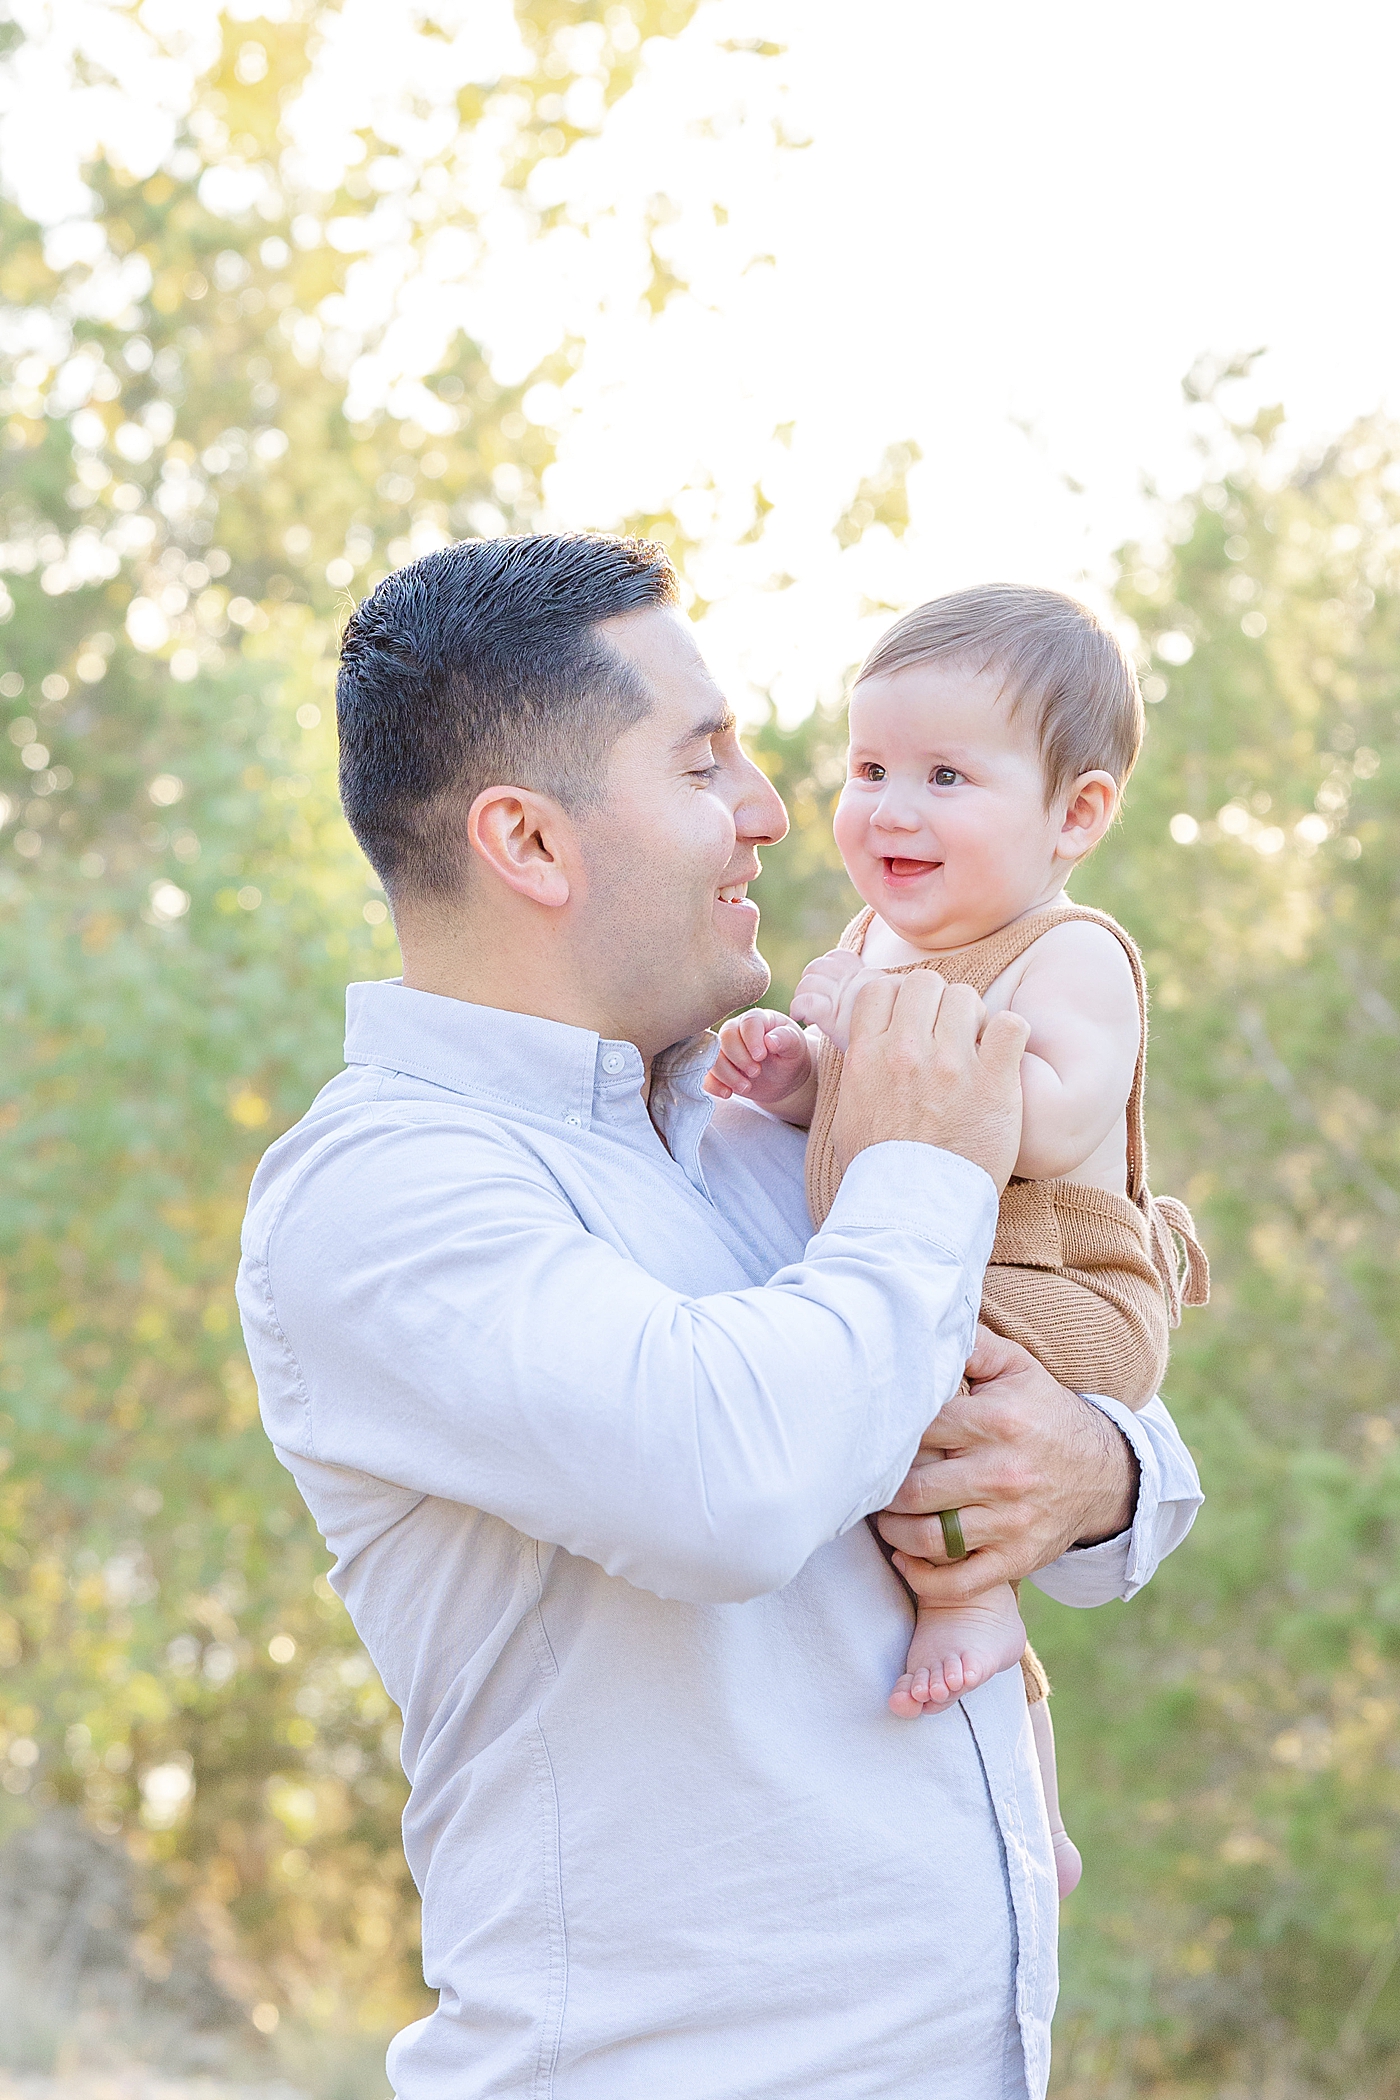 Dad laughing and holding her baby boy during Six Month Milestone Session | Image by Sana Ahmed Photography